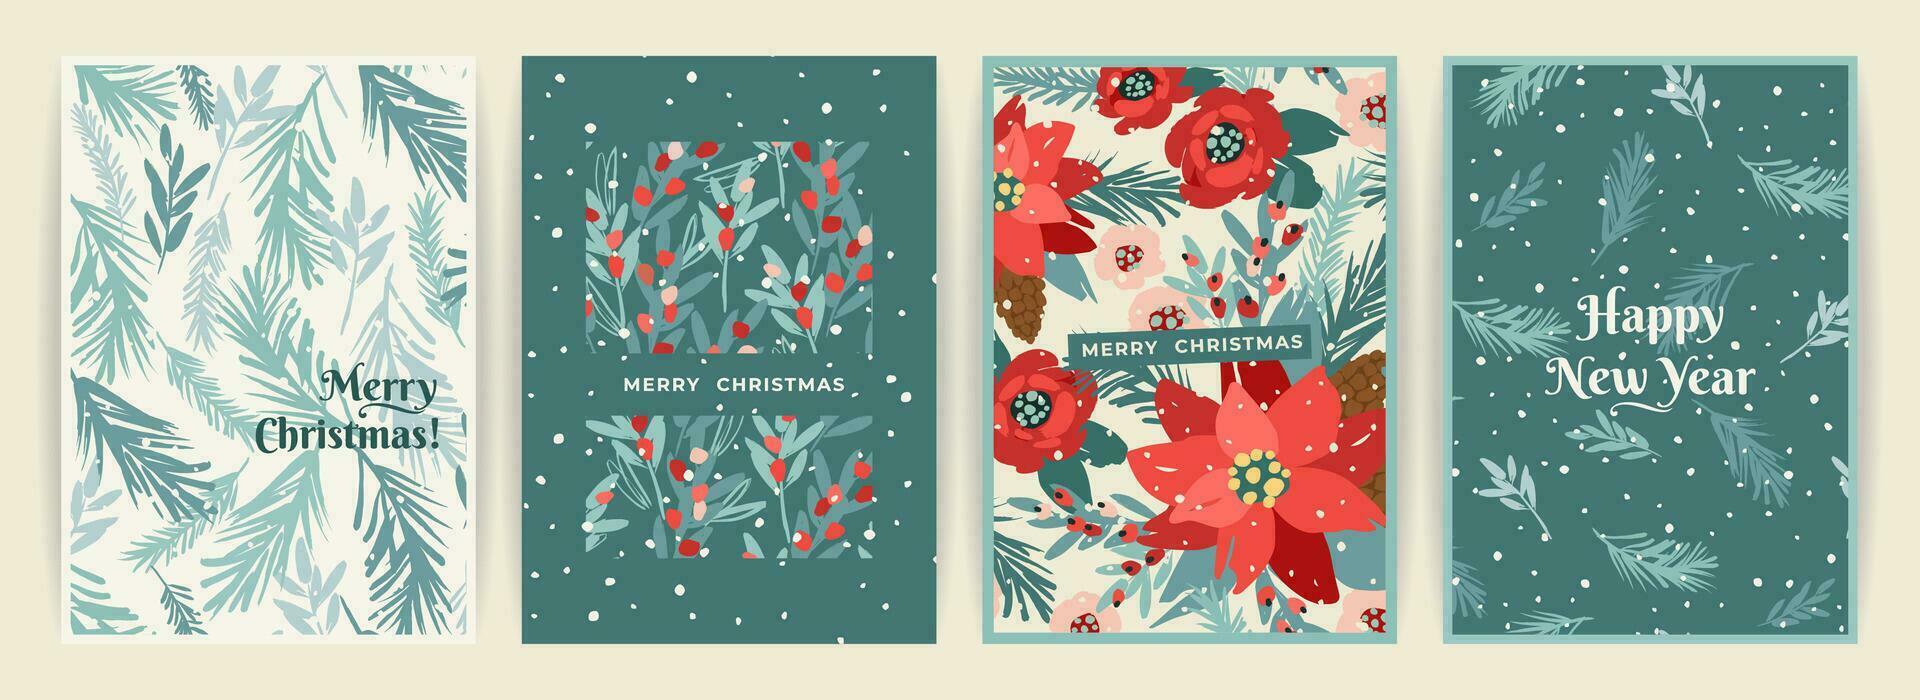 Christmas and Happy New Year cards with flowers, christmas tree, branches, leaves, berries, snowflakes. Trendy retro style. Vector design templates.